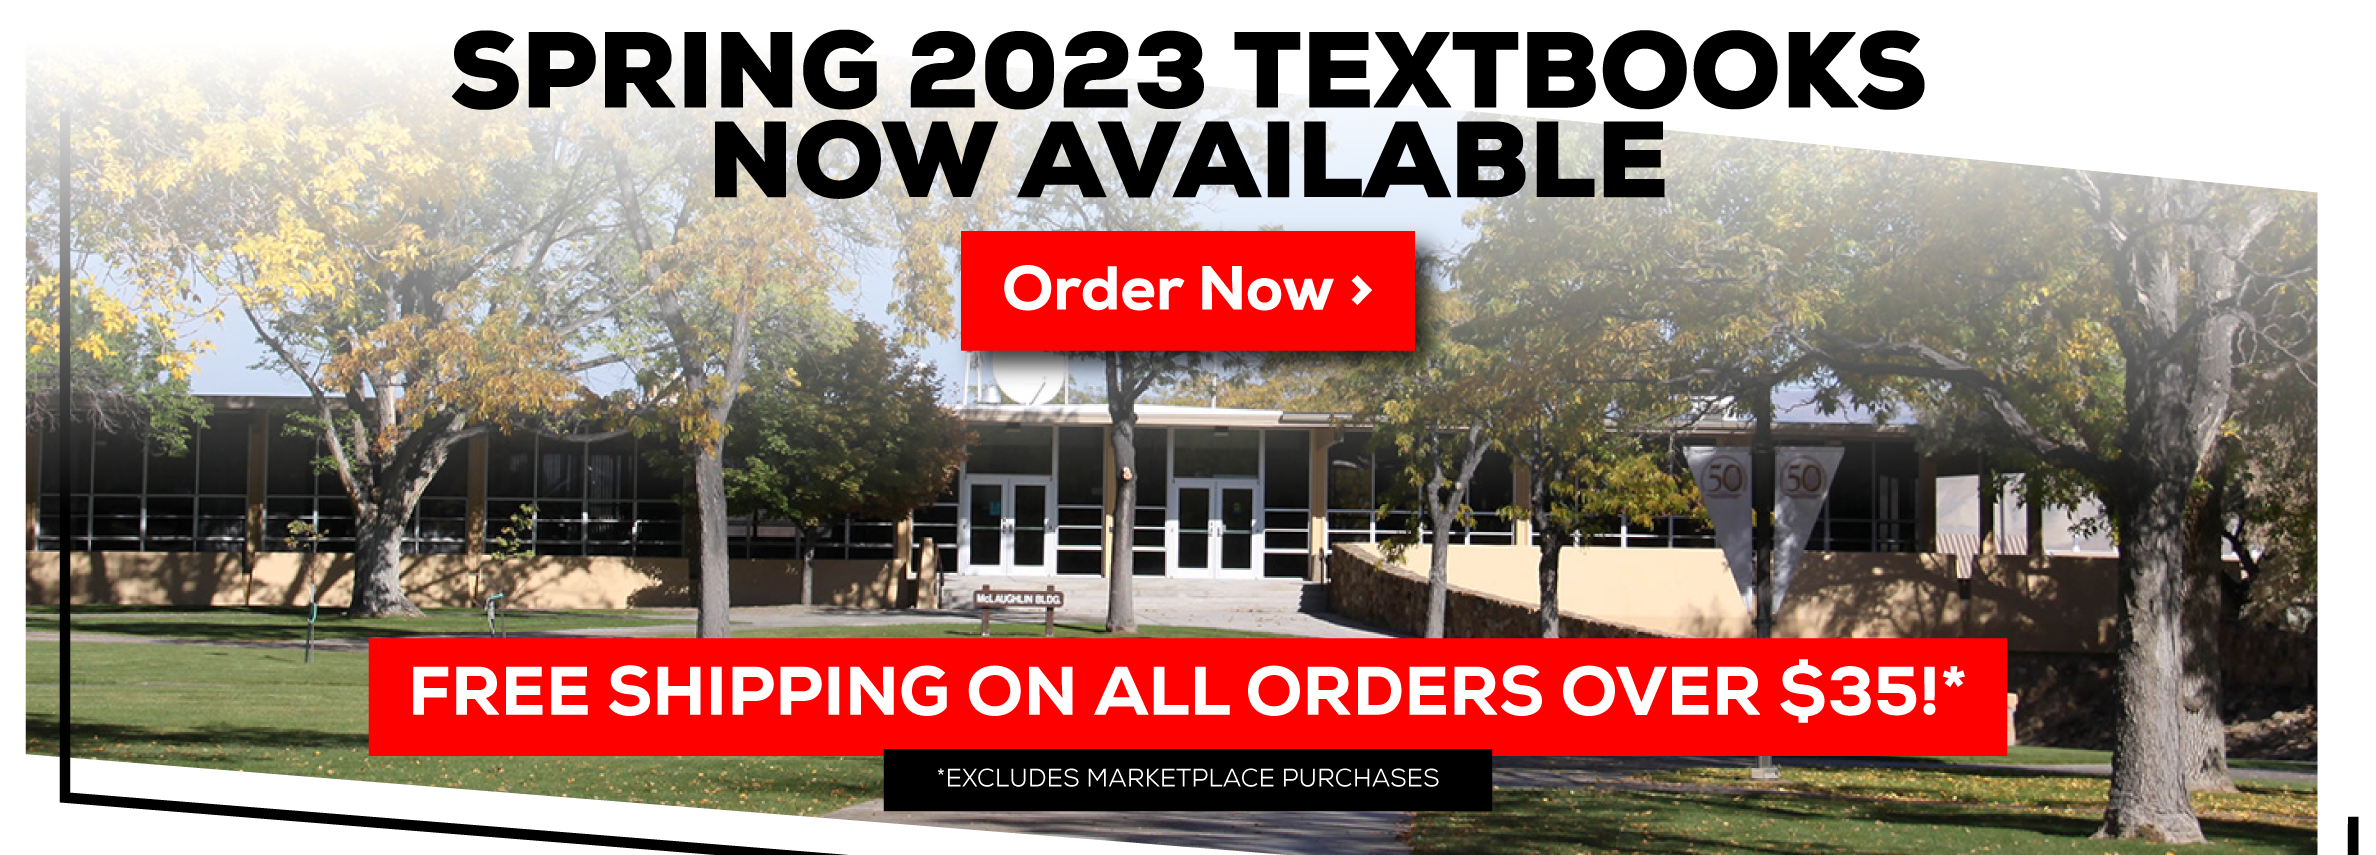 SPRING 2023 TEXTBOOKS NOW AVAILABLE Order Now > FREE SHIPPING ON ALL ORDERS OVER $35!* *EXCLUDES MARKETPLACE PURCHASES